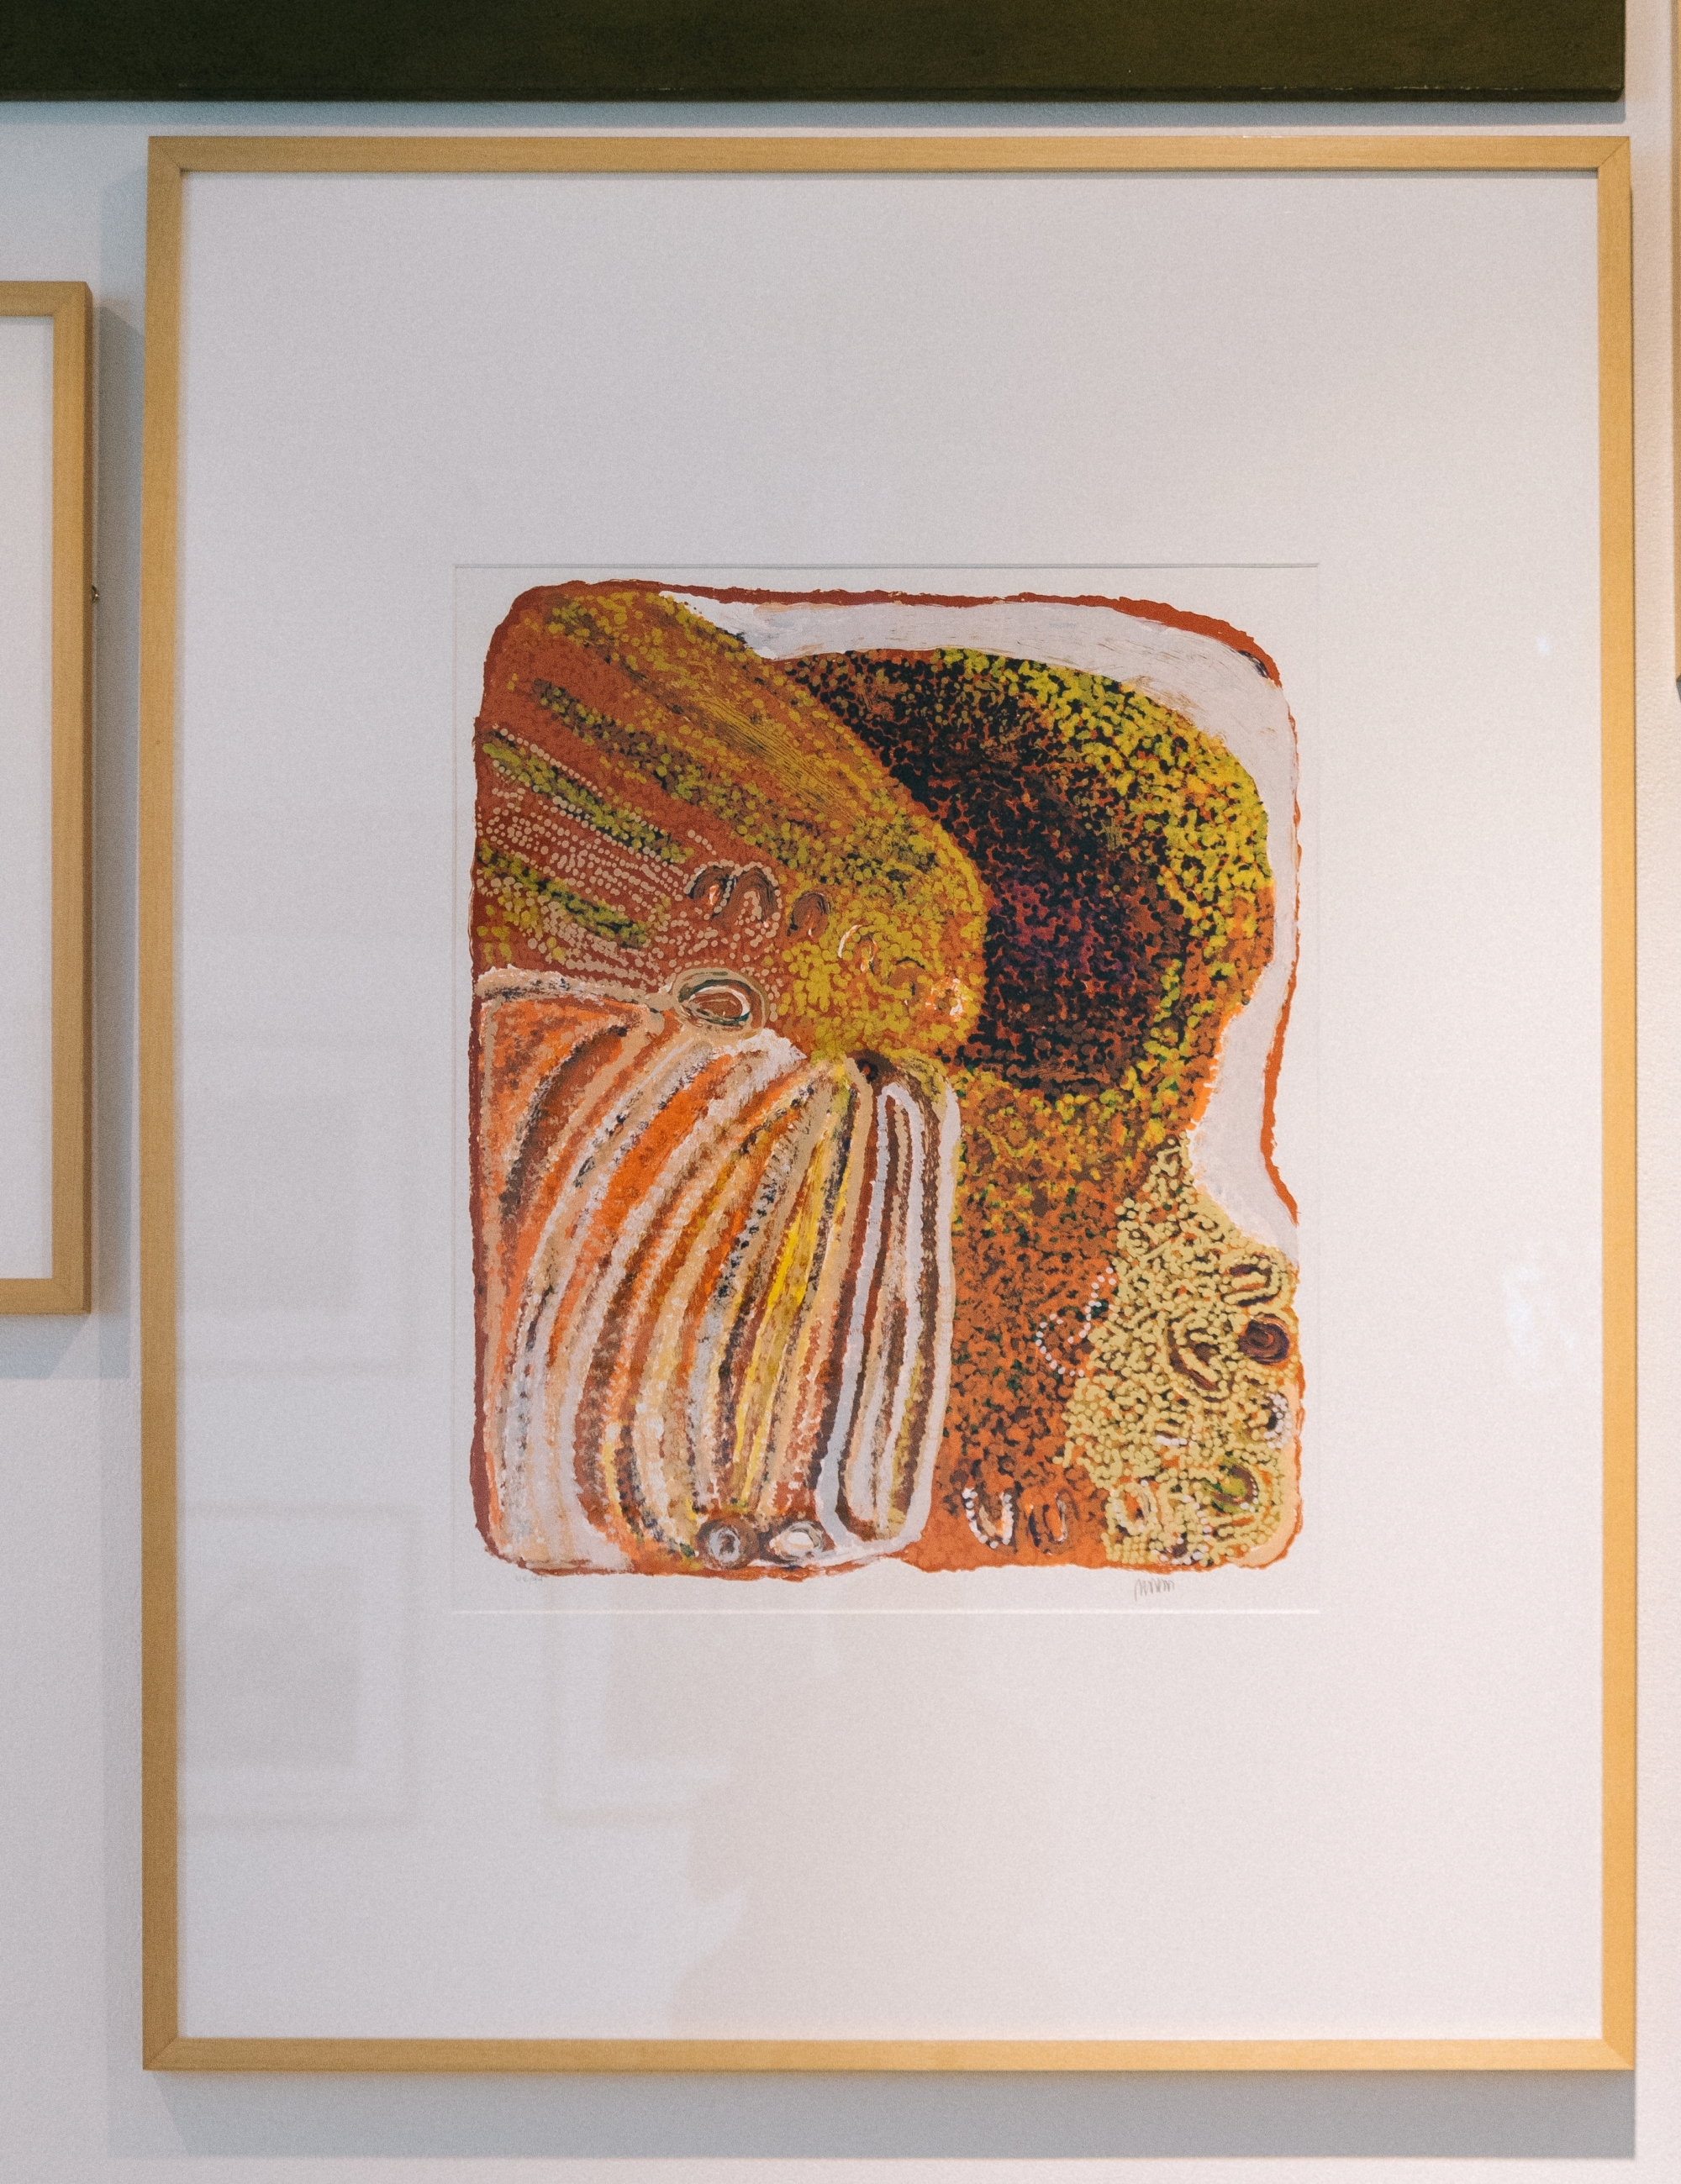 Timber framed, vertically presented colourful screenprint. An abstract image of browns, reds, yellows, whites and orange colours with delicate dots and details.